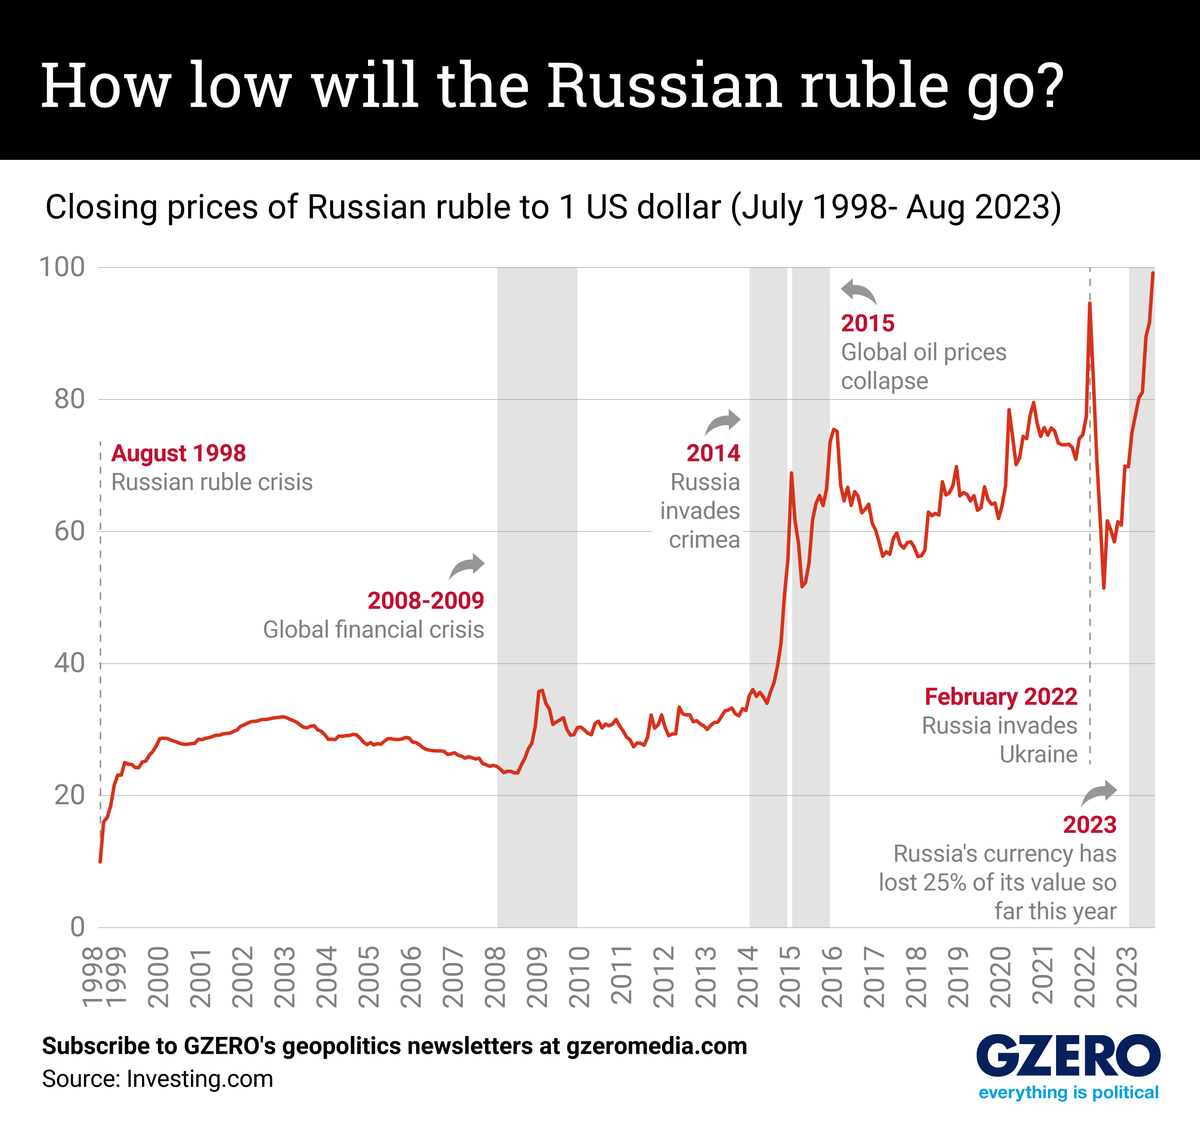 The Graphic Truth: How low will the Russian ruble go?